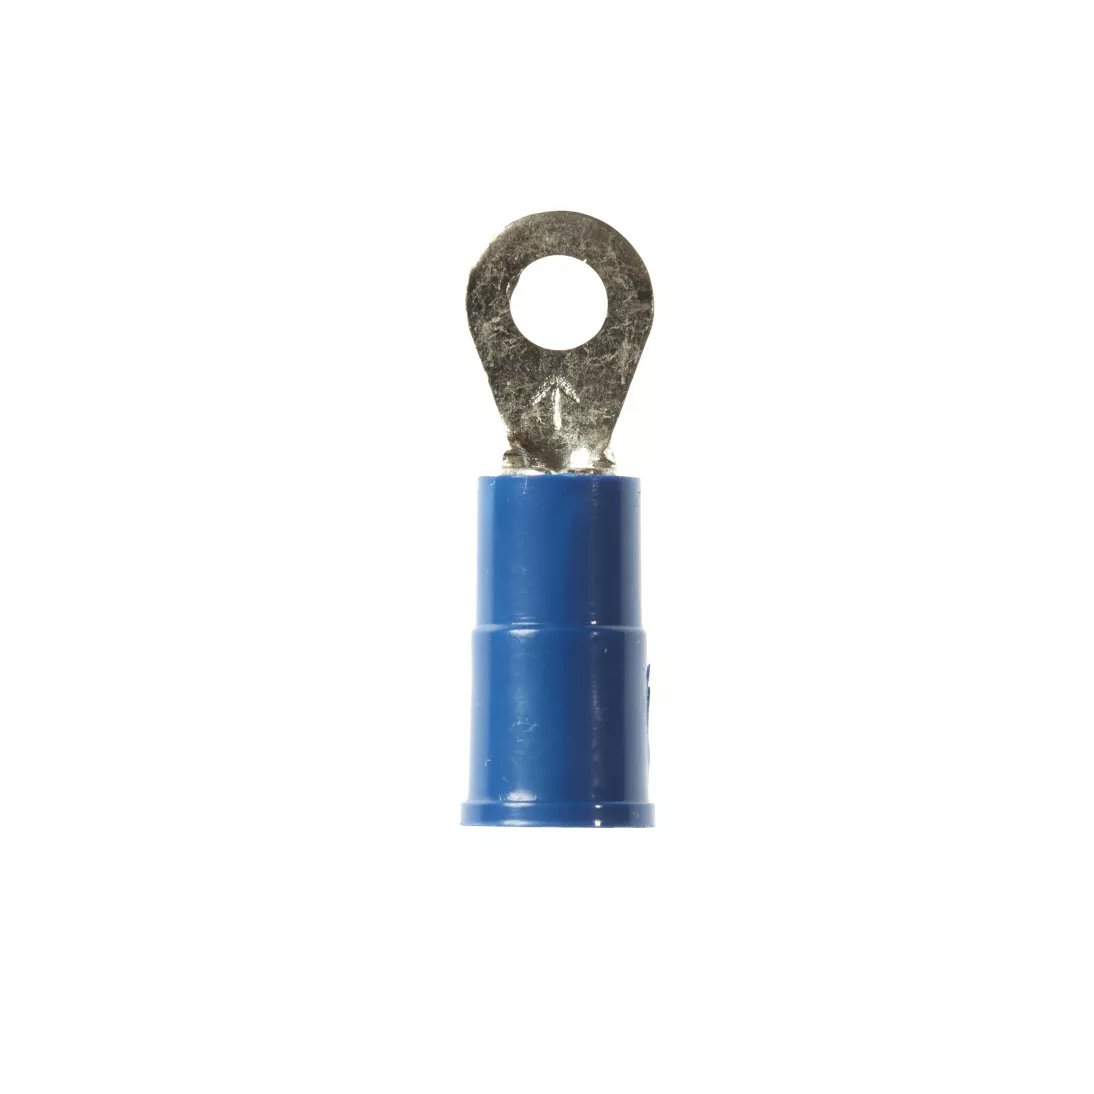 3M™ Scotchlok™ Ring Vinyl Insulated, 100/bottle, MV14-4R/SX,
standard-style ring tongue fits around the stud, 500/Case